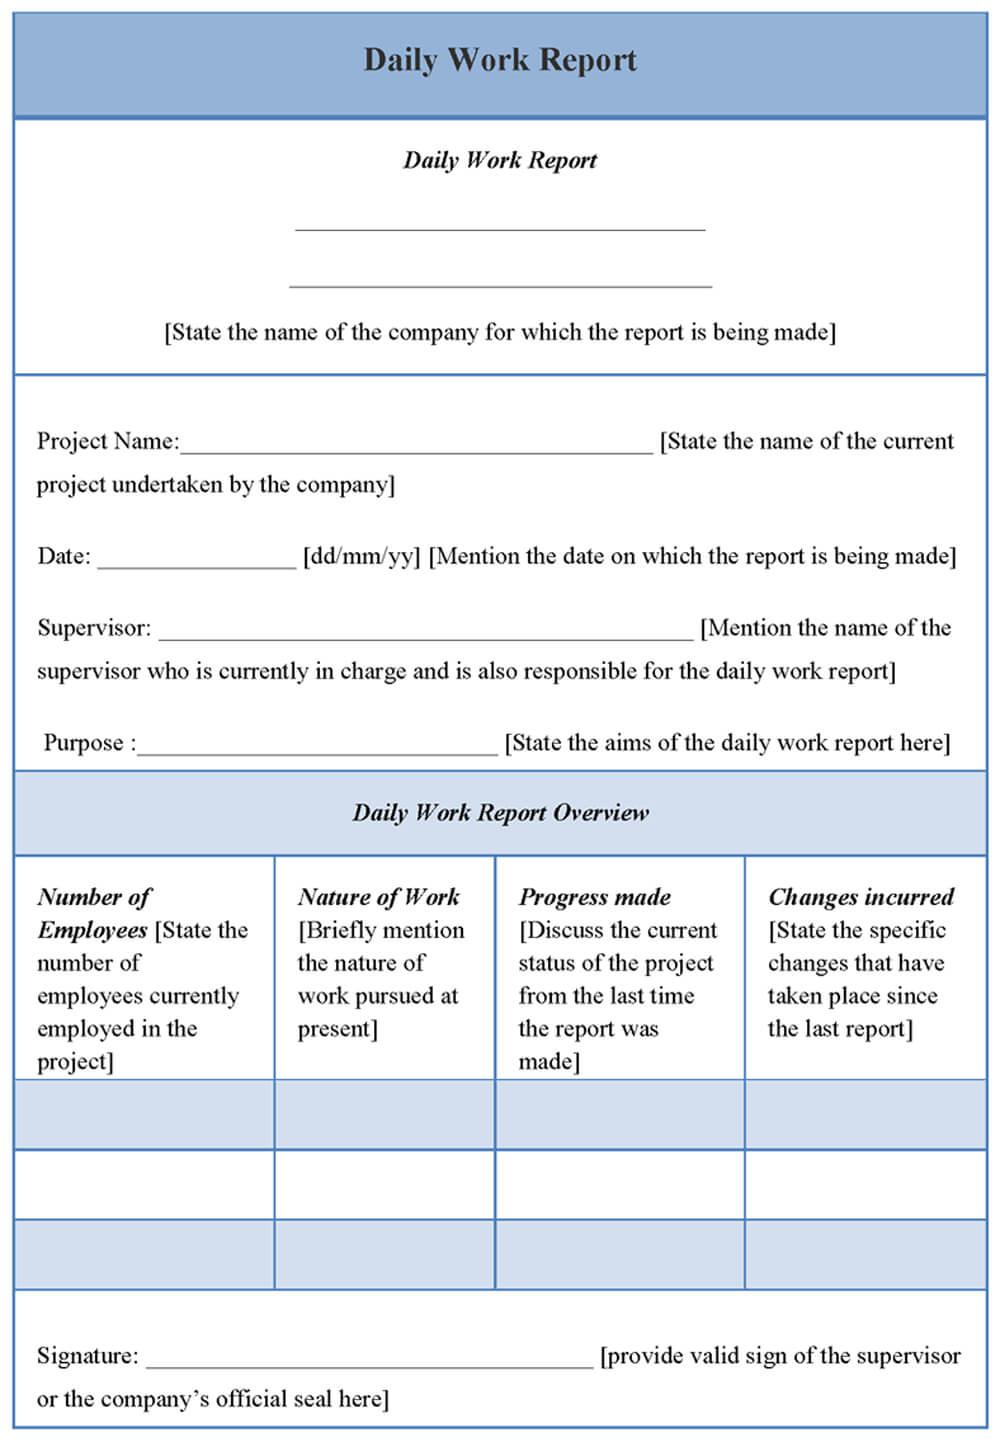 Daily Work Report Template | Report Template, Resume Intended For Daily Work Report Template